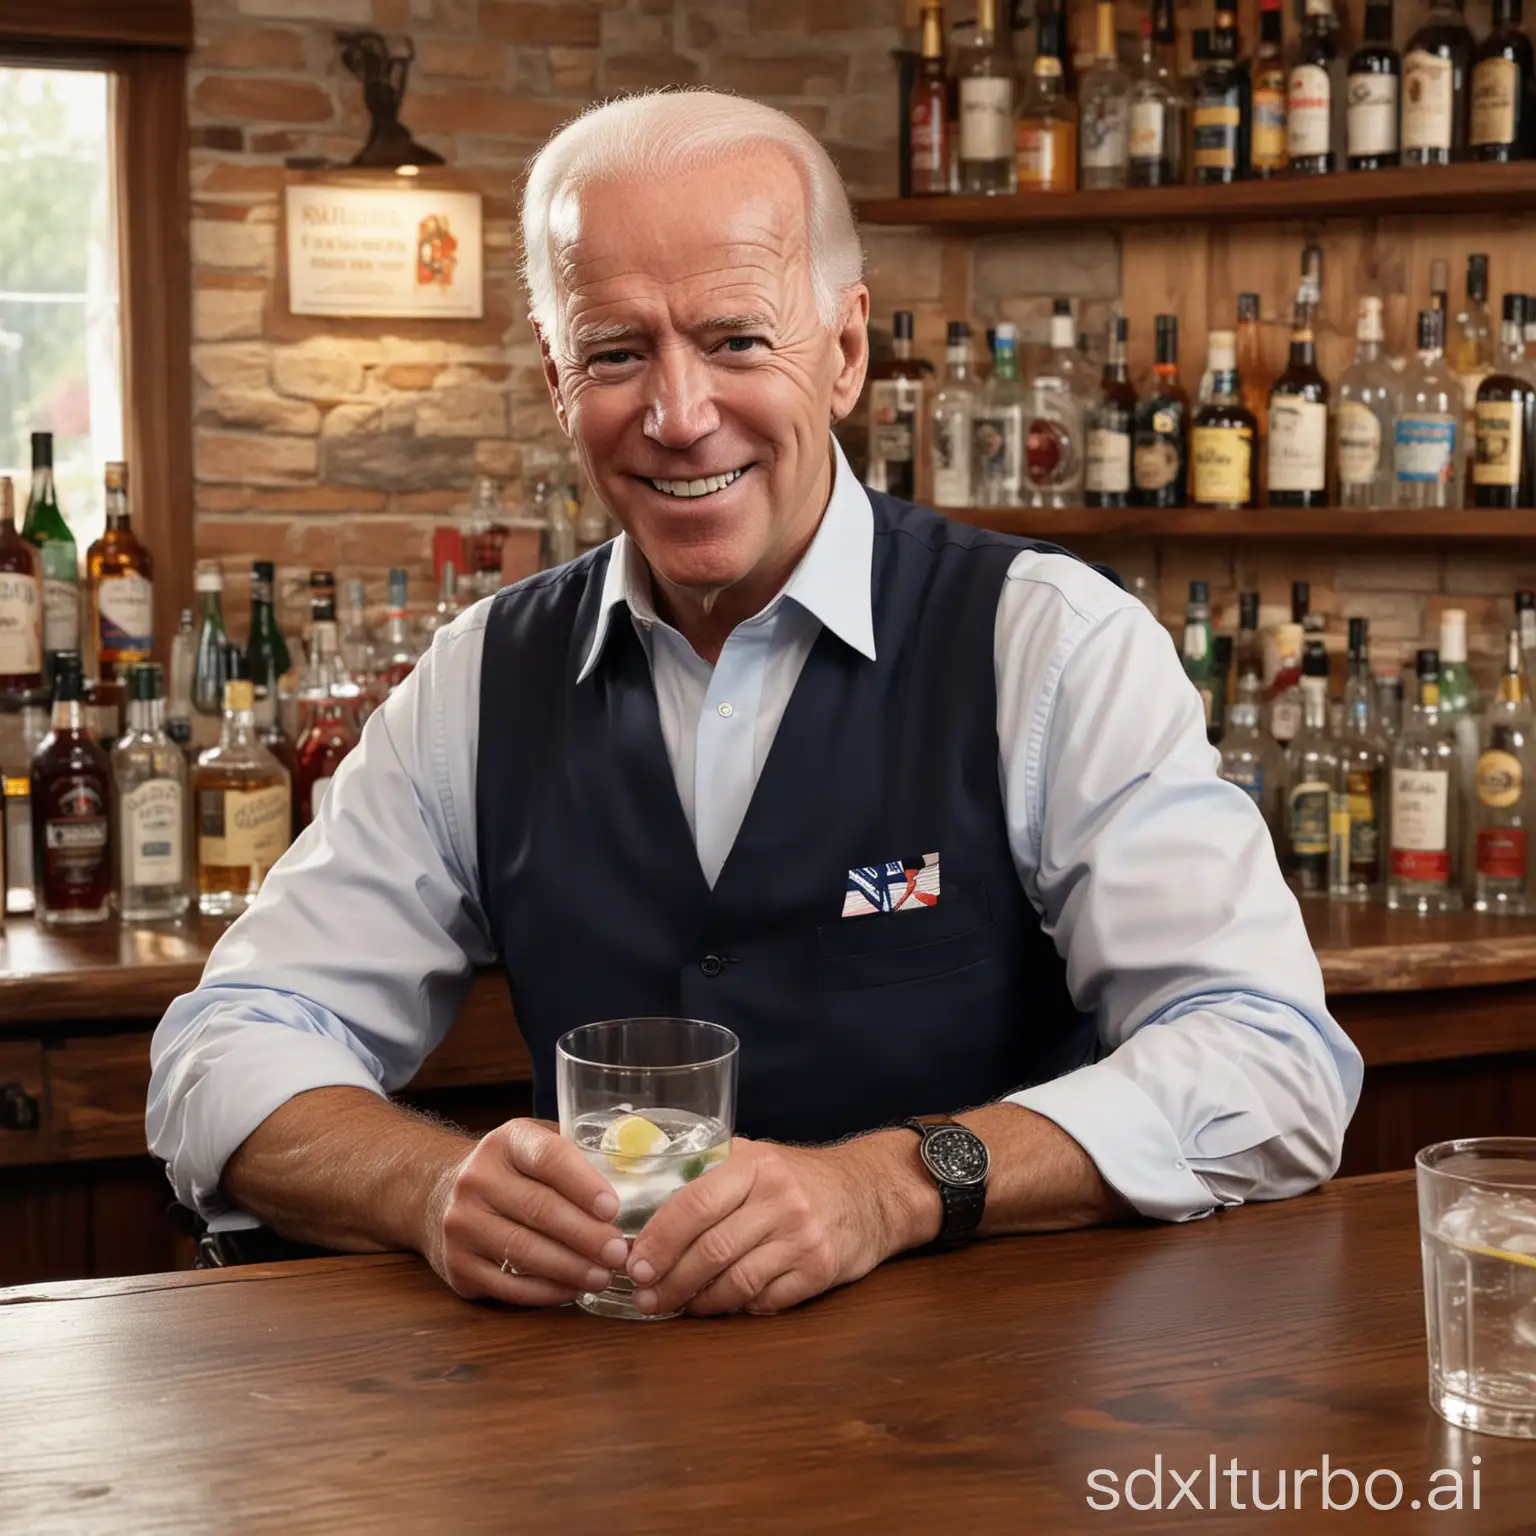 Joe Biden, the former Vice President of the United States, sitting at a bar. He is wearing a vest and a shirt, and he is smiling as he enjoys his drink. The man is holding a glass of gin tonic, which is a popular cocktail made with gin, tonic water, and a slice of lemon. He got TWO GINTONIC next to him ONE IN HIS HAND about to OUT DRINK his COMPETITION IN A WESTERN SHOOTOUT STYLE DRINK OFF under the table, Party, Western, Presidential, 8k, photorealistic

The bar is well-stocked with numerous bottles of various liquors displayed on shelves behind the man.